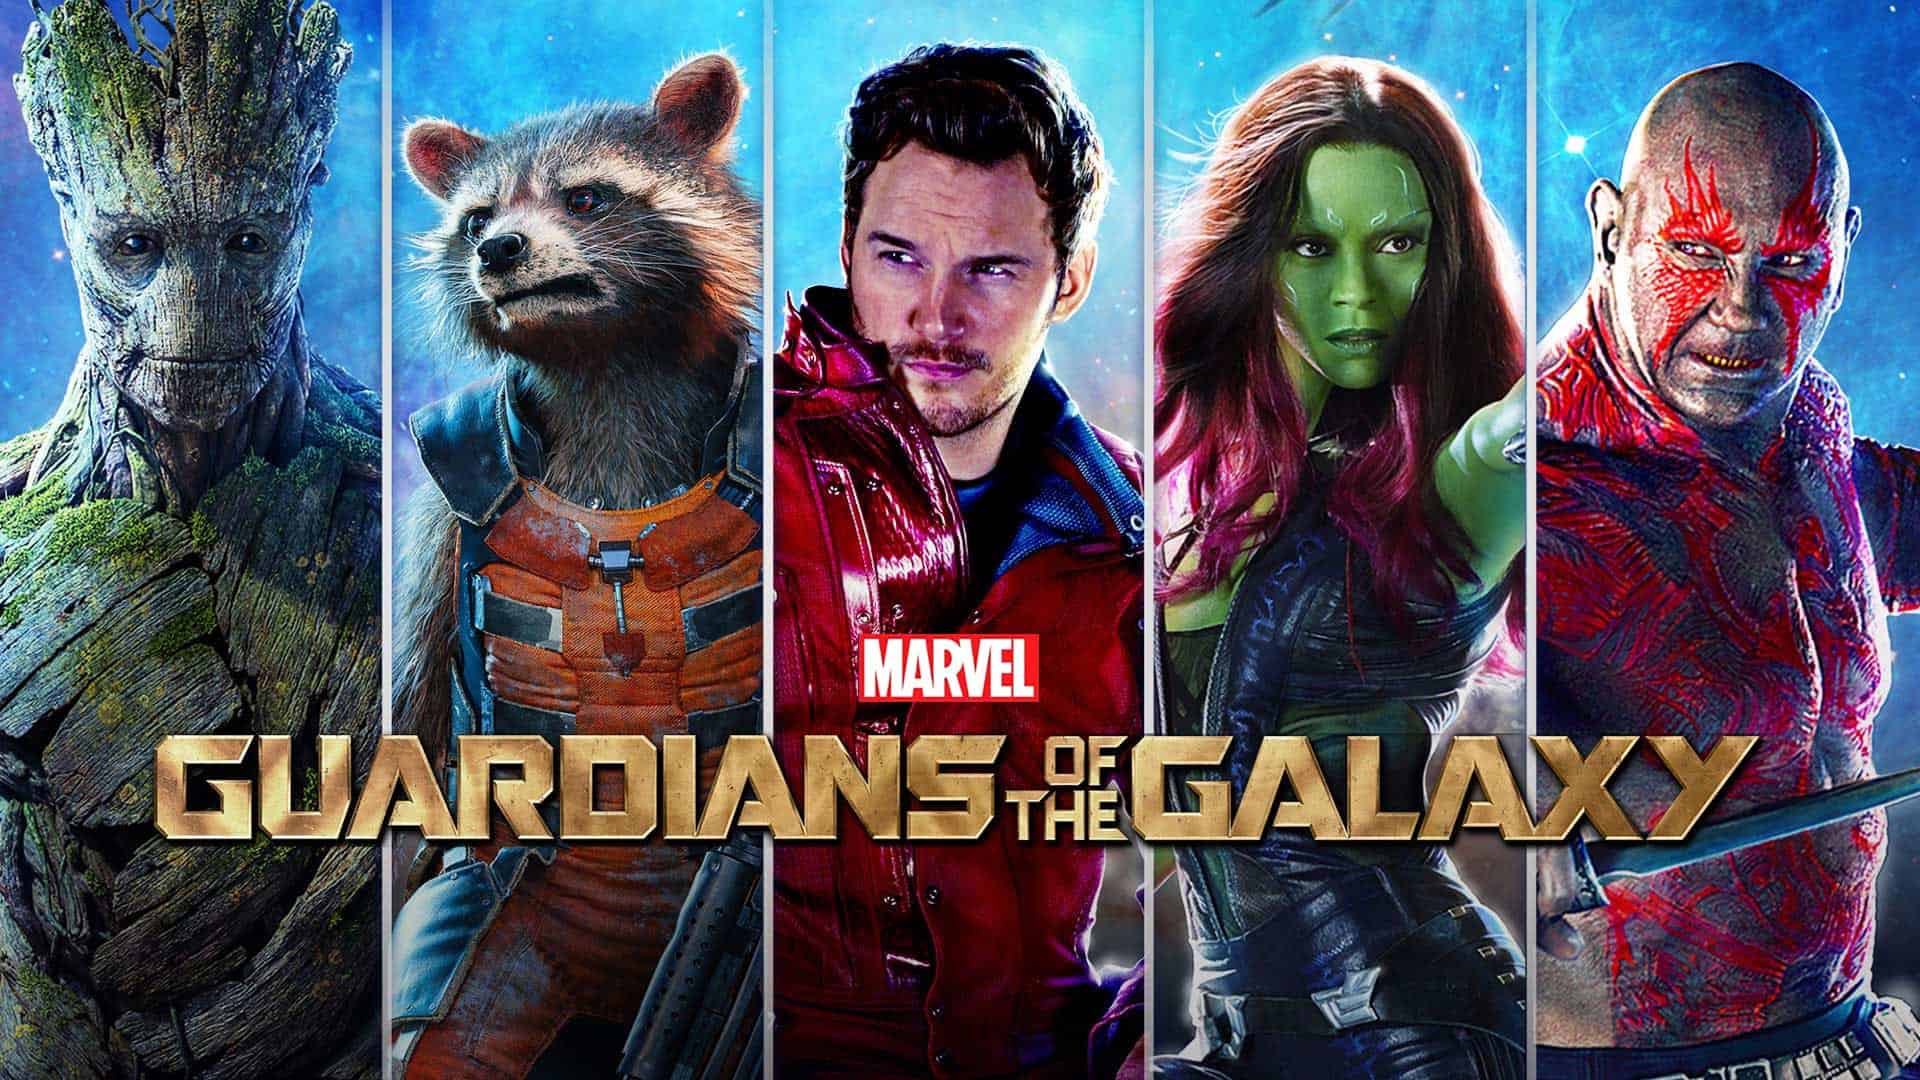 1655bfa0e43b2c2ac2d5e47880c1fc4bb86d2e02bbb648df31784ceb50820799 Guardians Of The Galaxy Vol. 3: Incredible Mid-Credit and Post-Credit Scenes (April 27) 